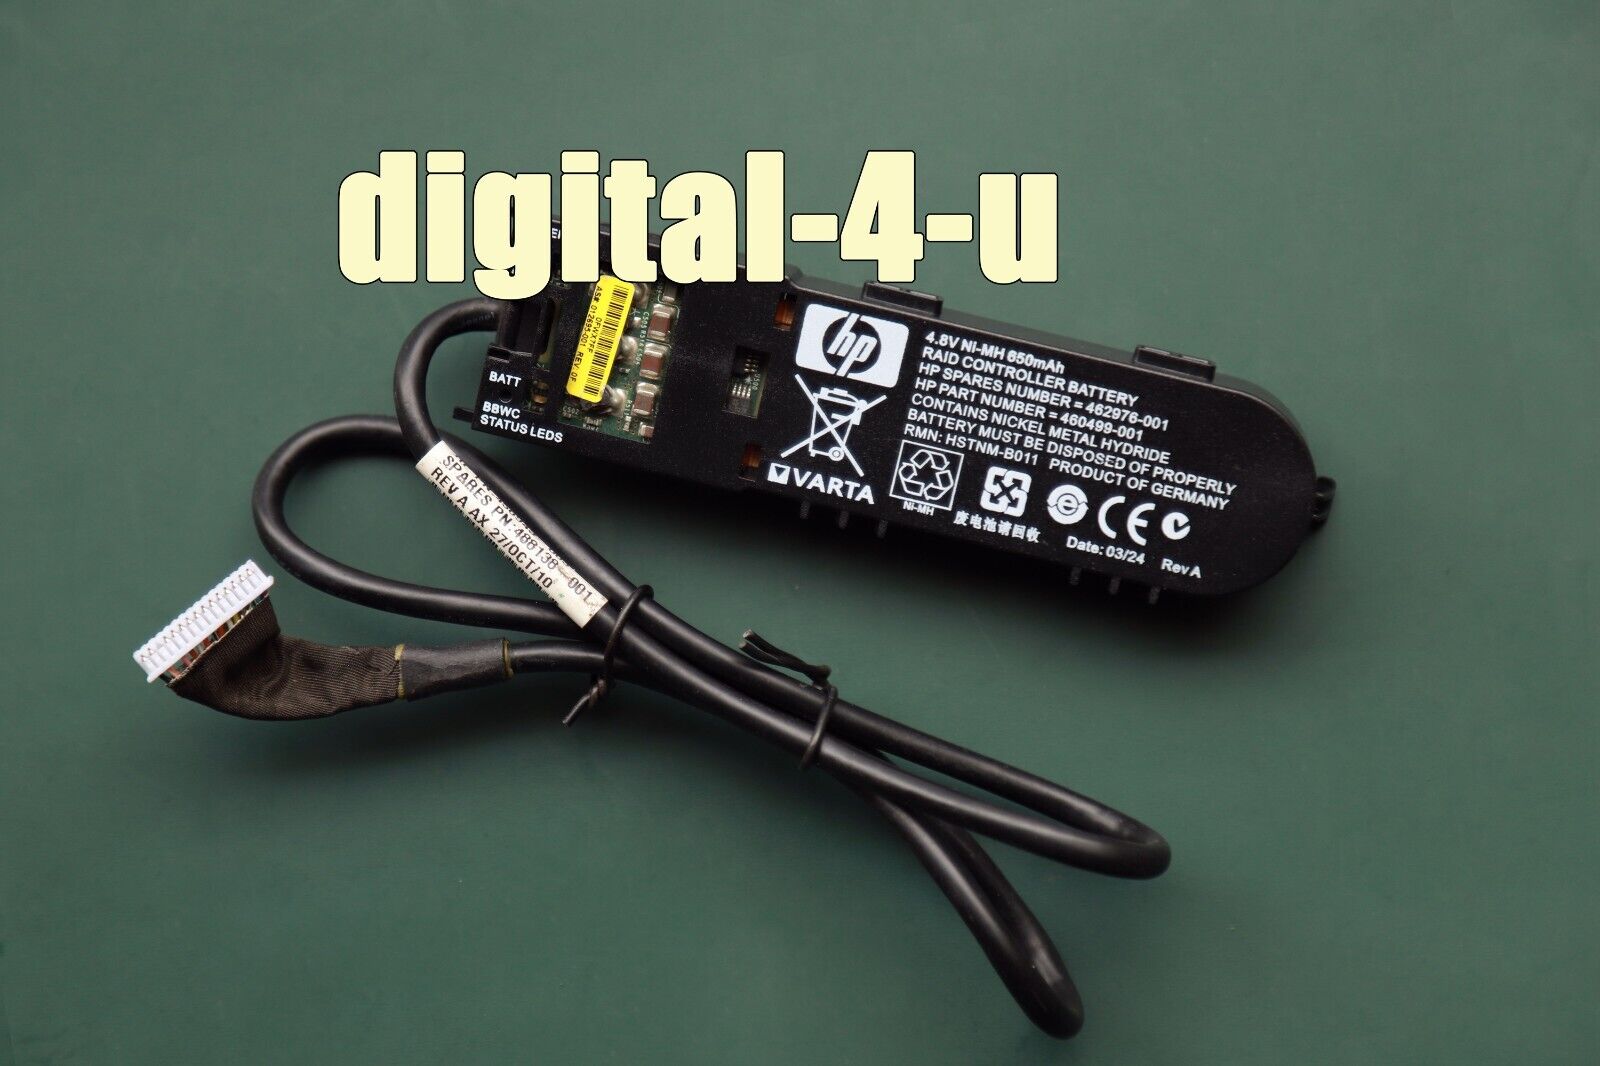 Genuine 462969-B21 462976-001 460499-001 for HP MAH P Series Battery With Cable